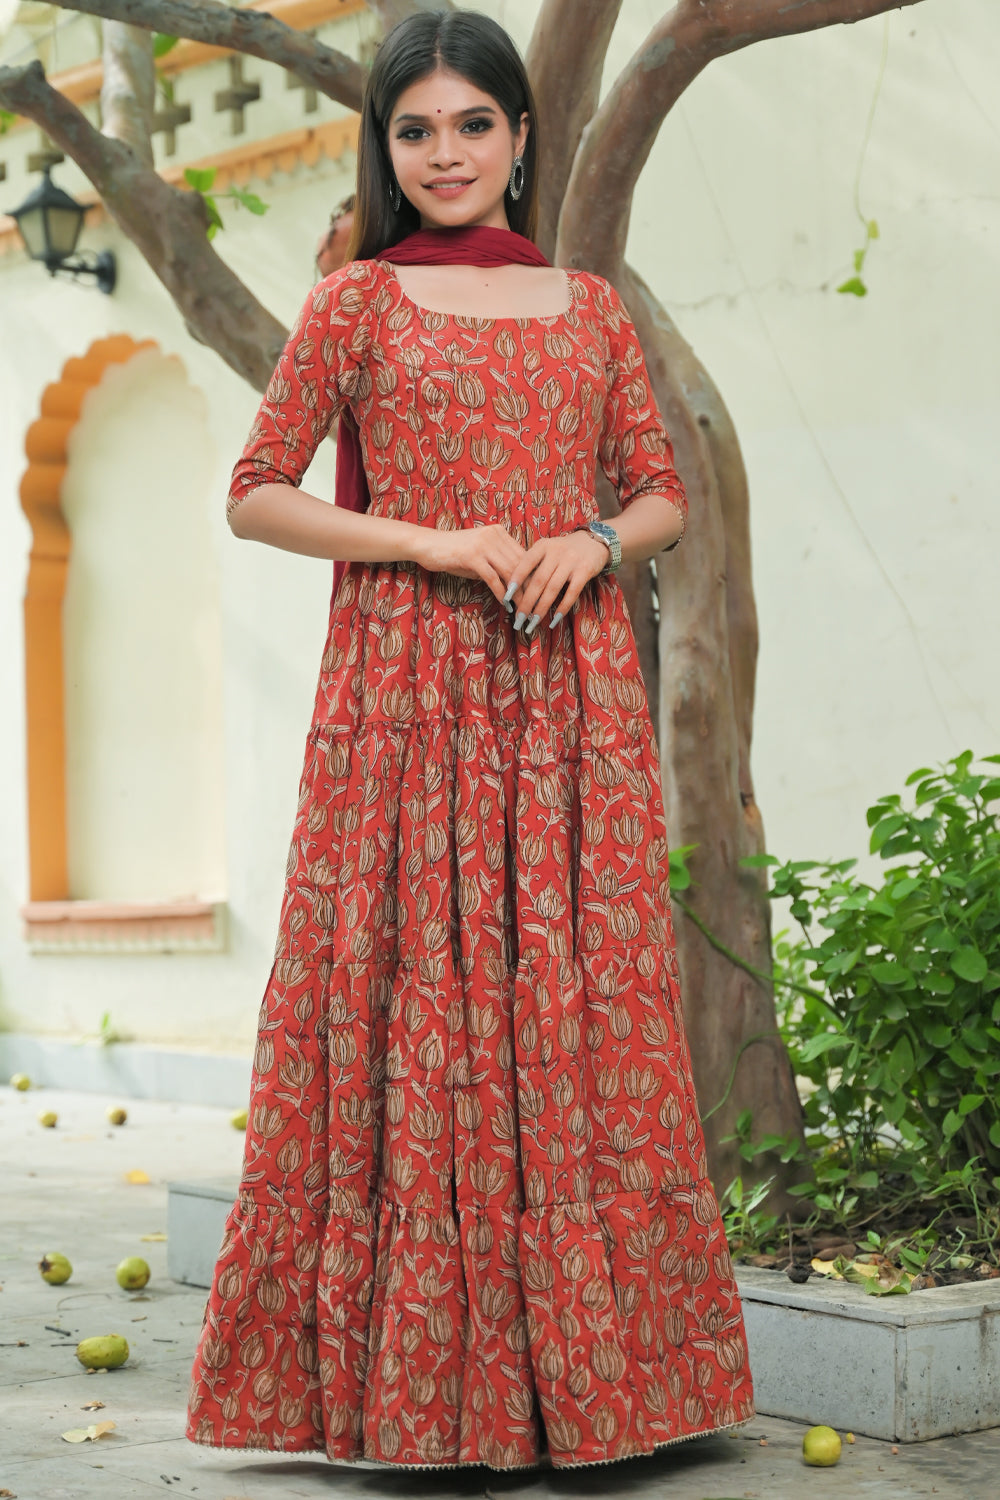 Radhika - 3 piece Tiered Anarkali in Terracotta Red Hand Block Print Mul Cotton, Leggins included | Made To Order